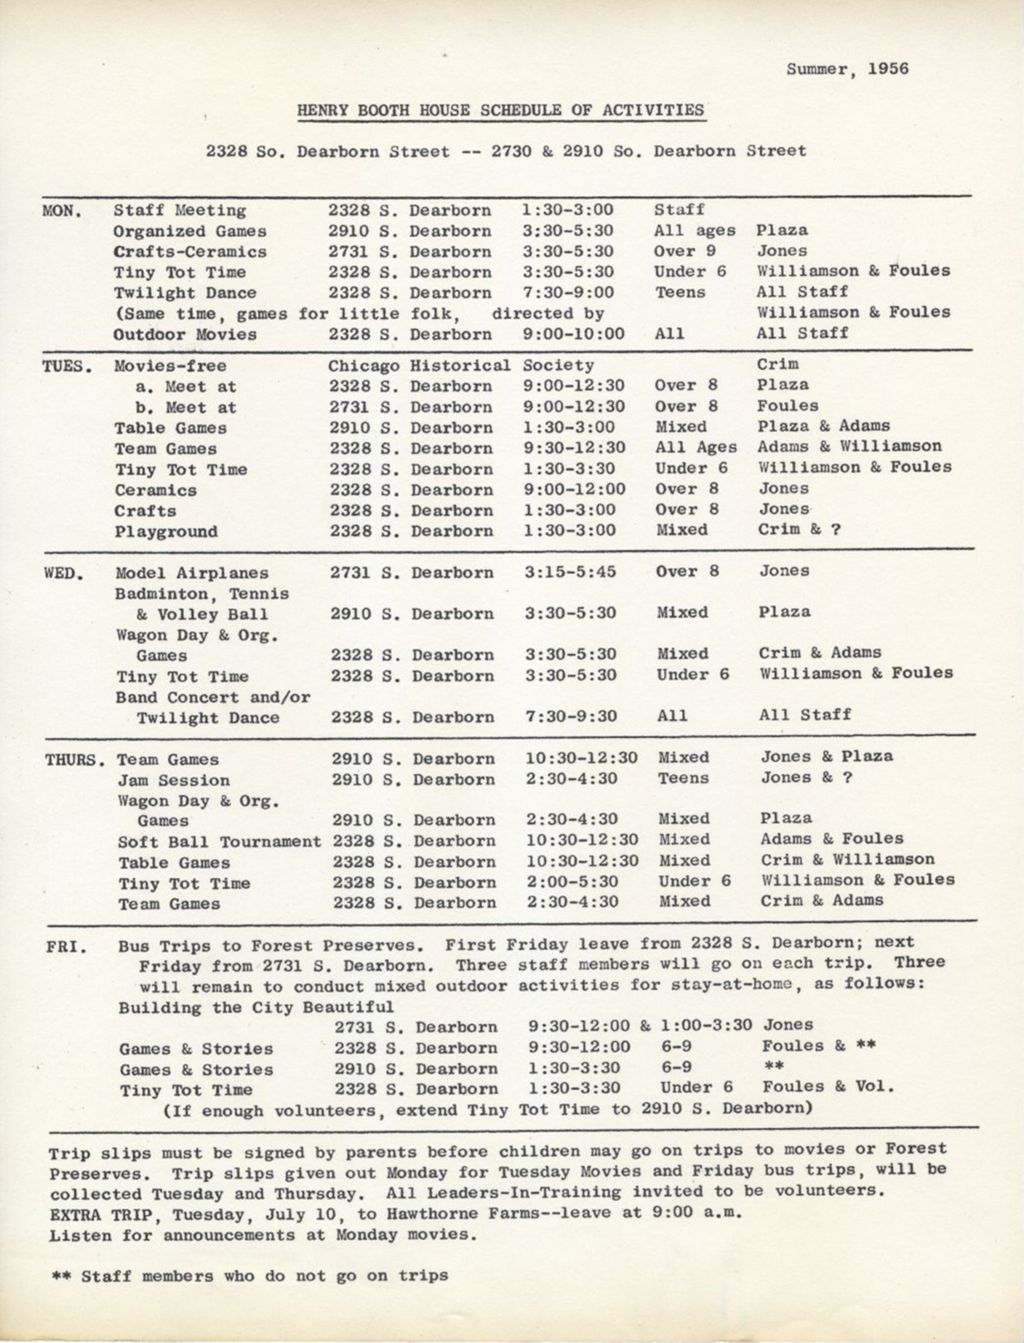 Henry Booth House schedule of activities